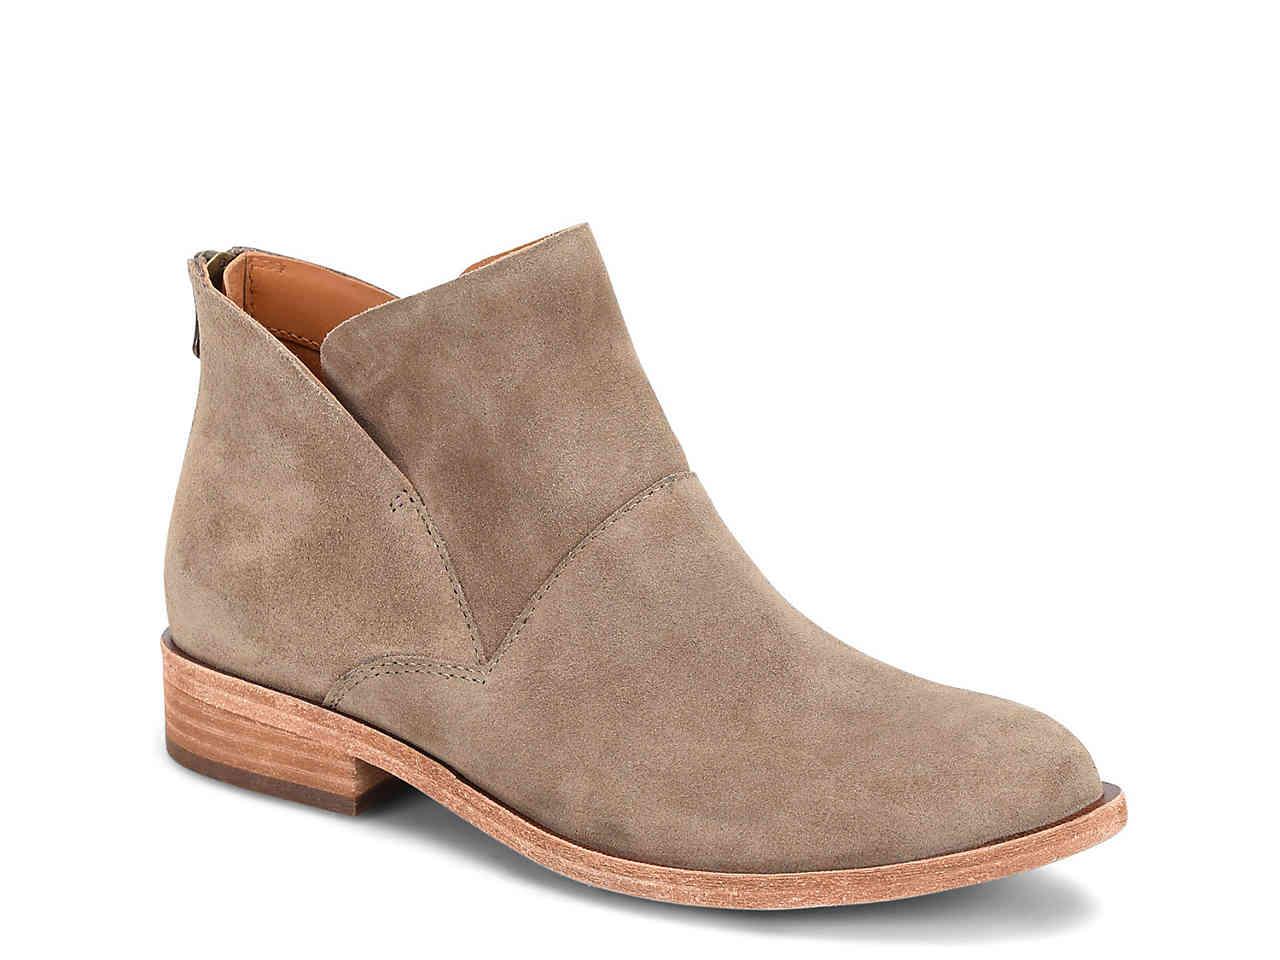 Kork-Ease Leather Ryder Bootie in Taupe (Brown) - Lyst